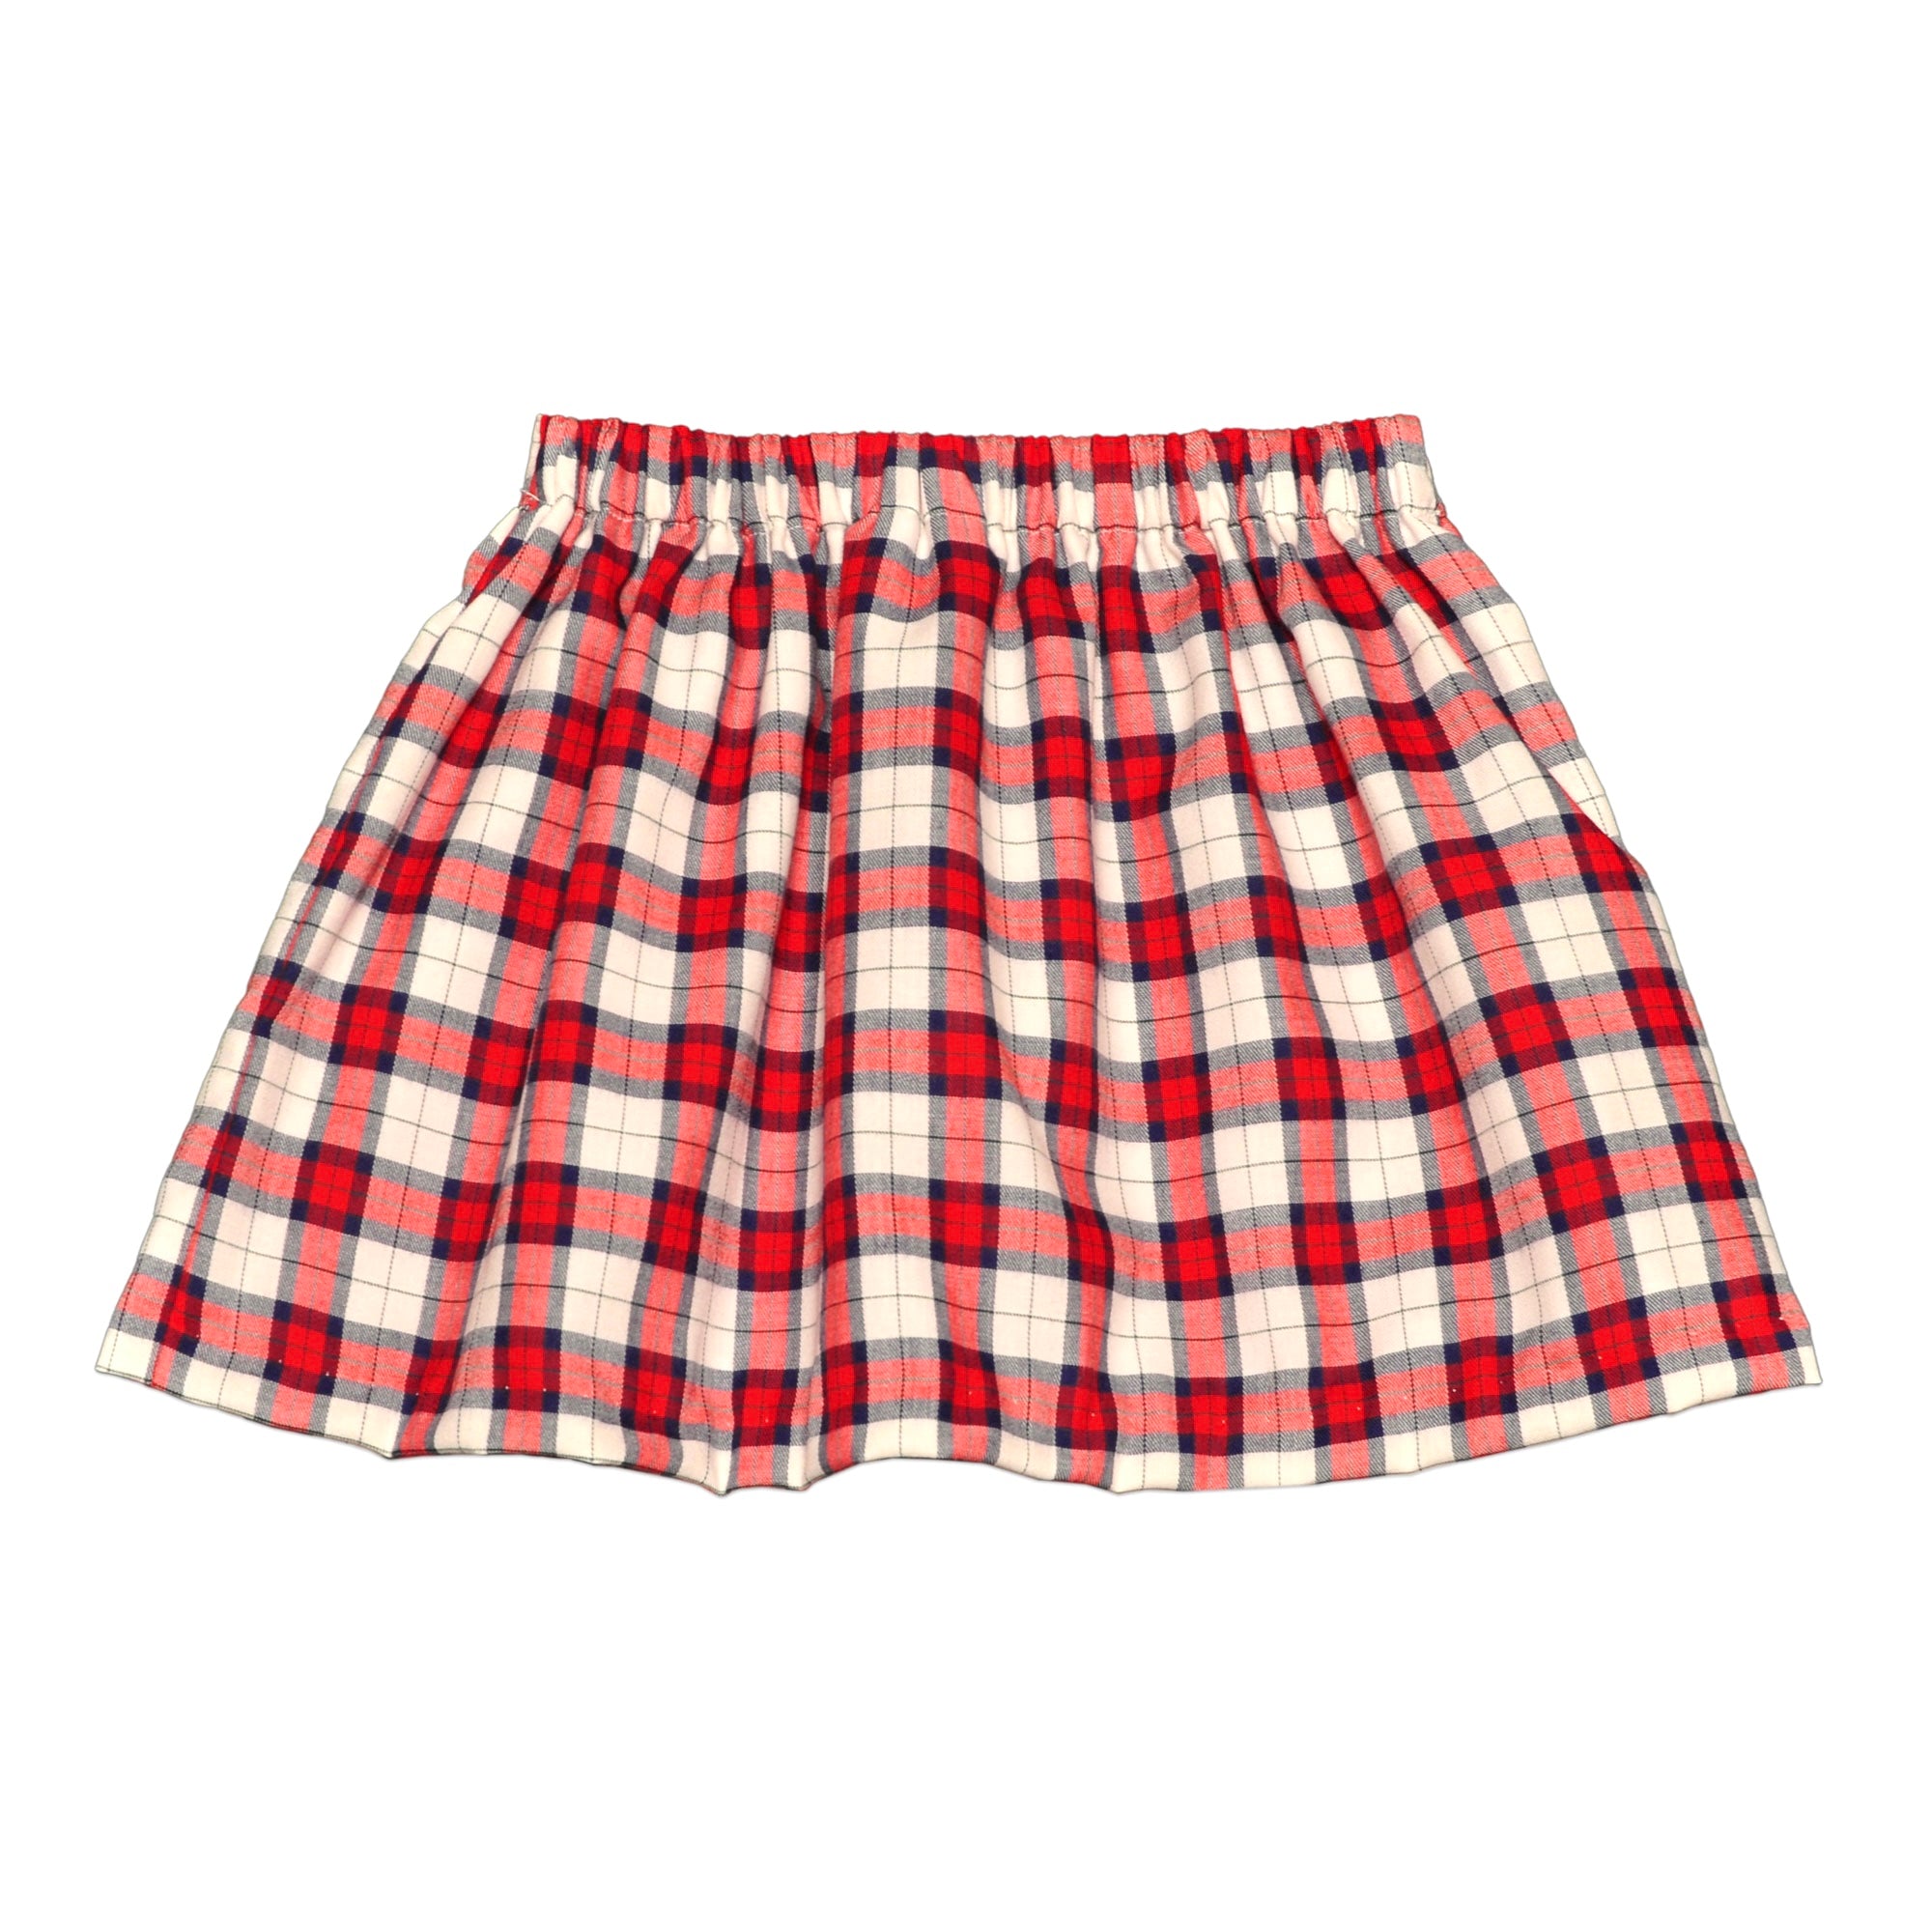 Navy, Red And White Plaid Skirt - Cou Cou Baby